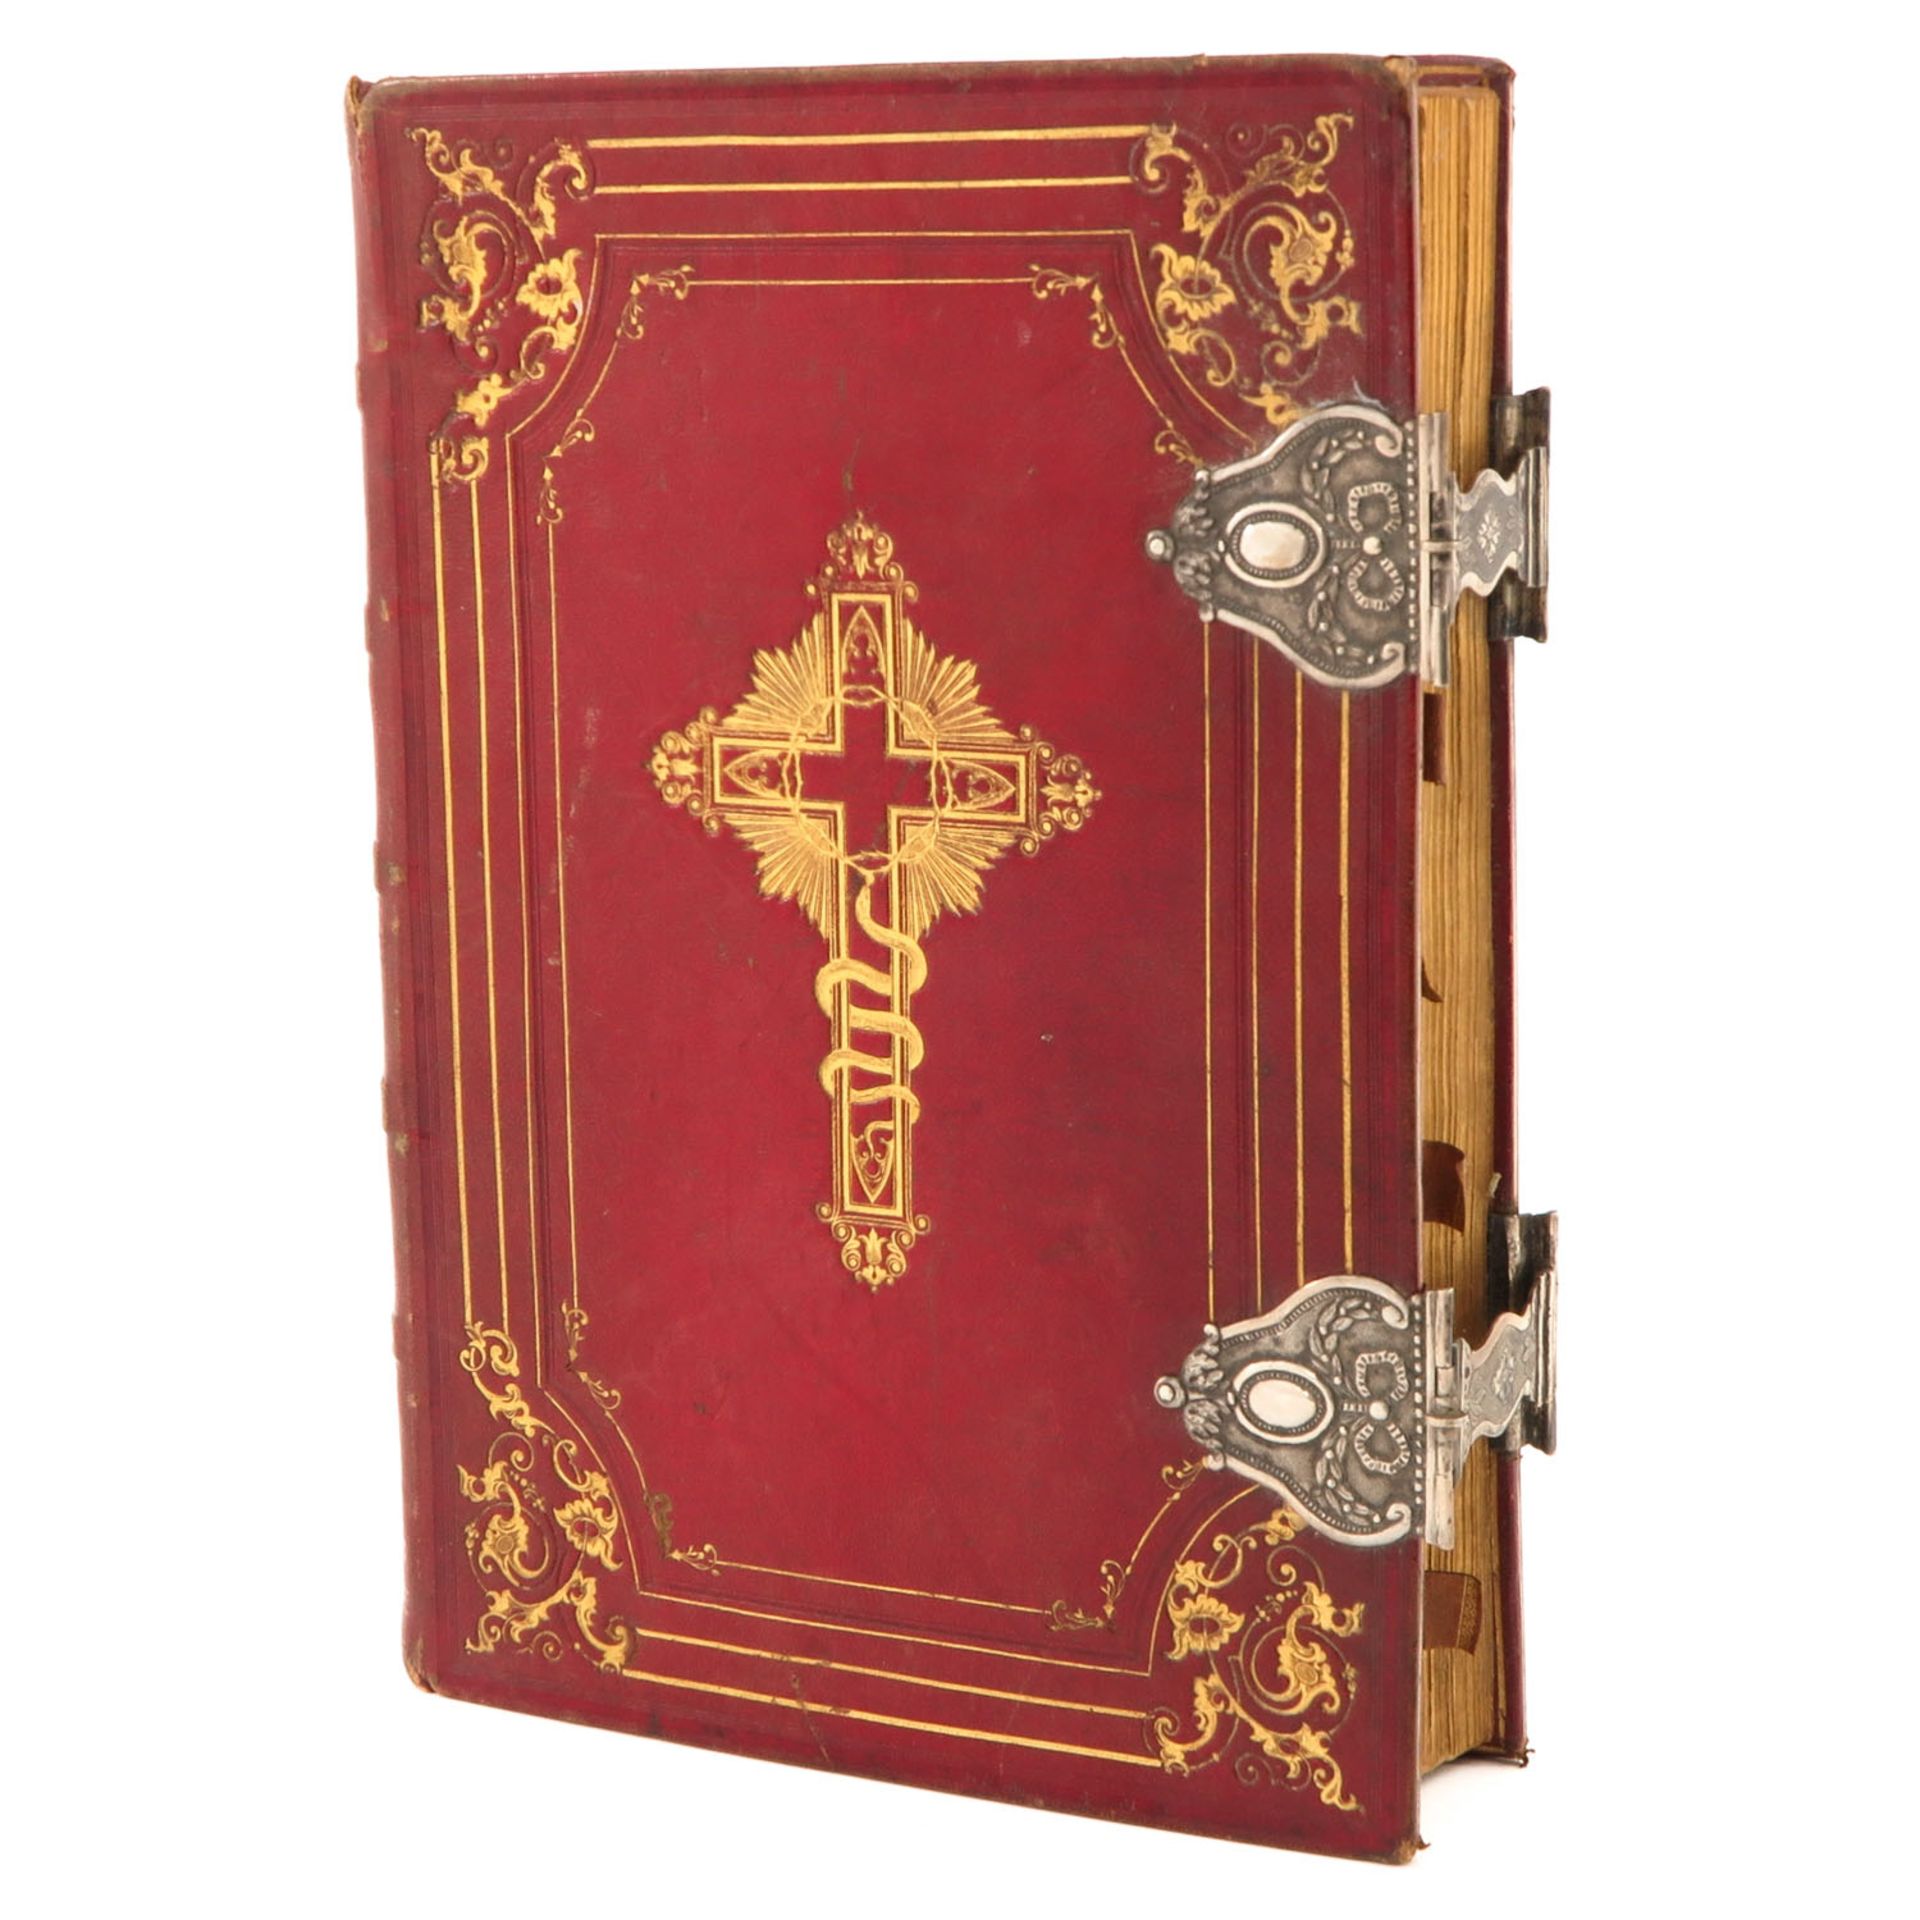 A Missal dated 1855 with Silver Clasps